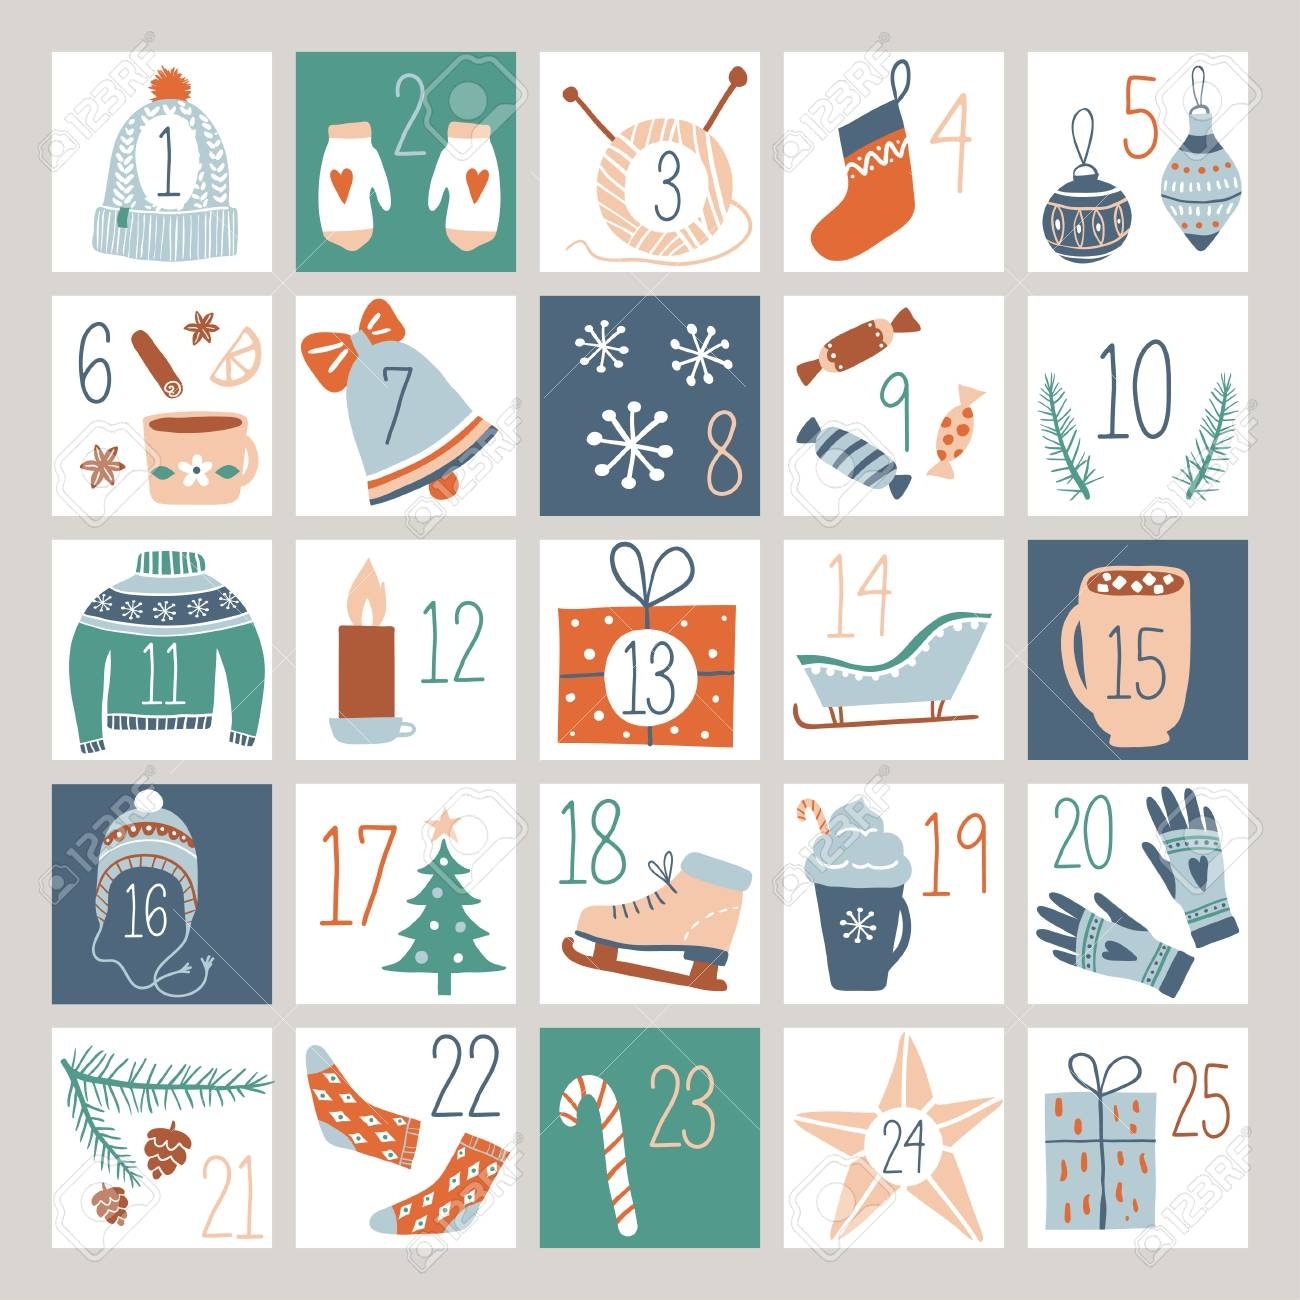 Countdown Advent Calendar Or Poster With Cute Hand Drawn Design Design A Countdown Calendar